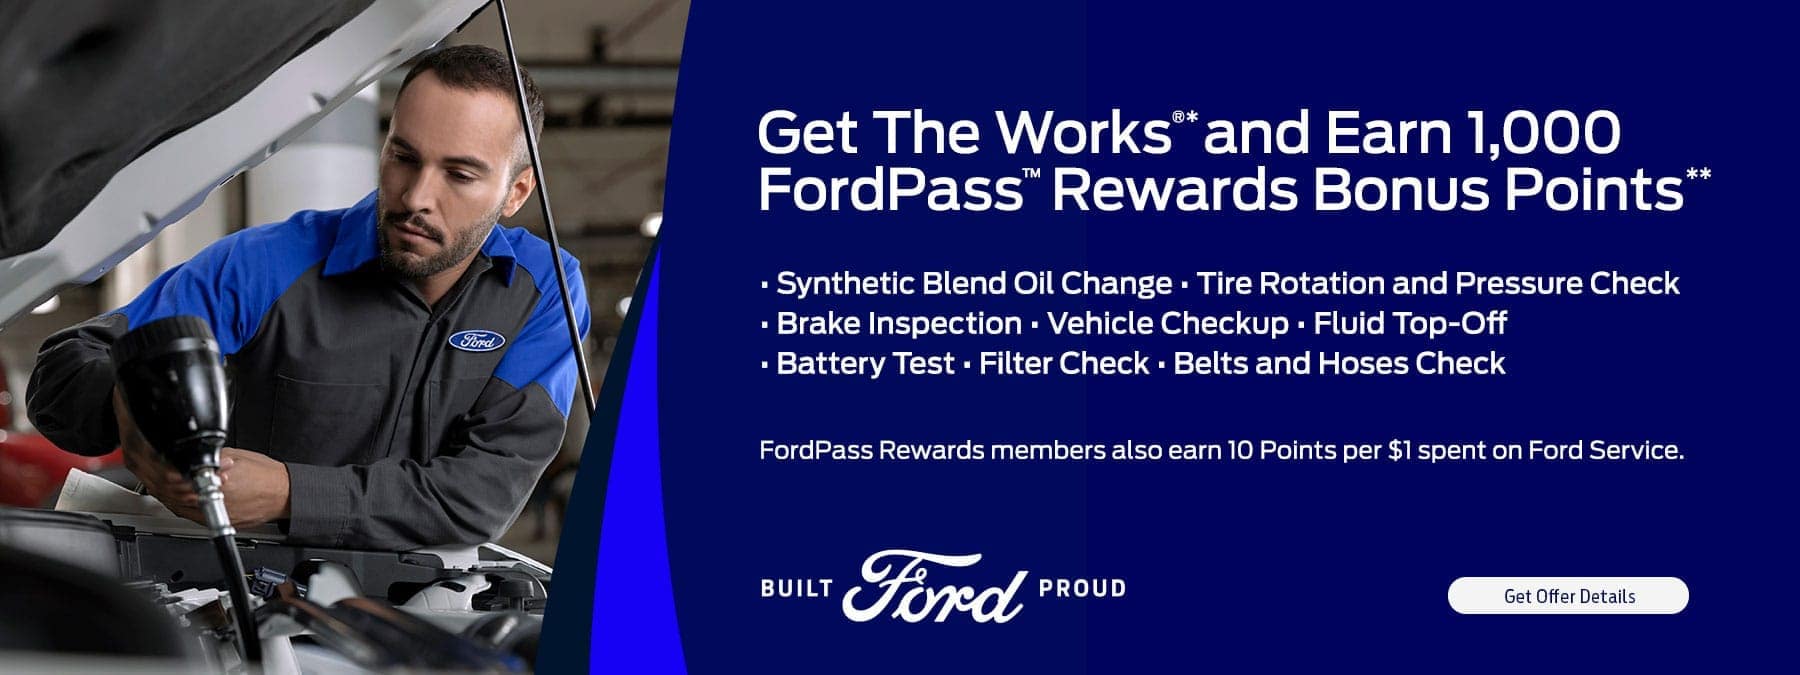 Get The Works and Earn FordPass Rewards points